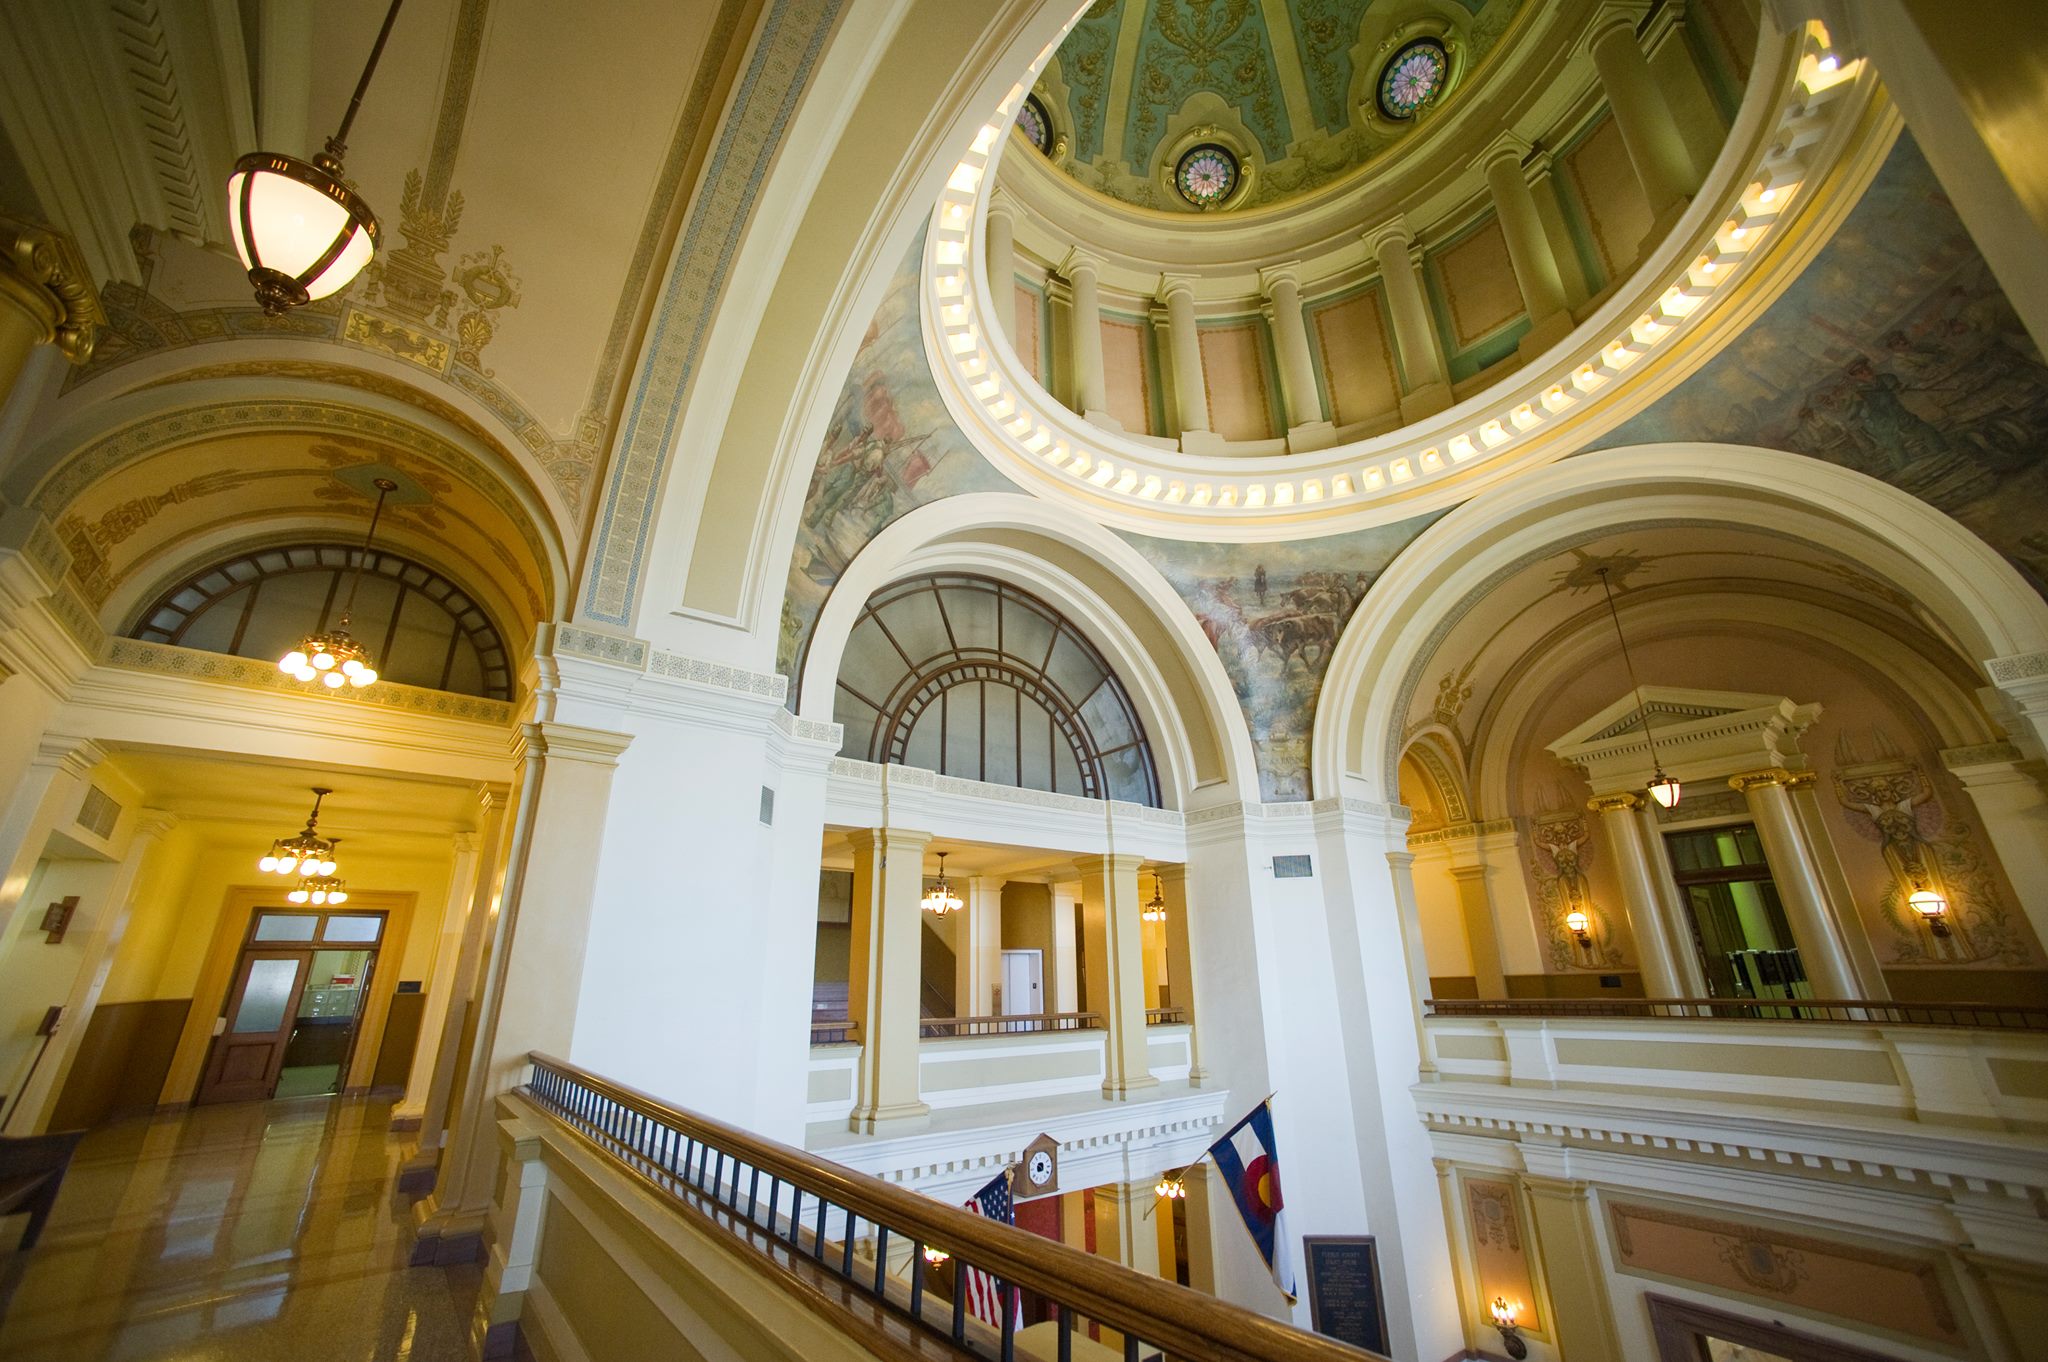 Courthouse Interior from 3rd Floor